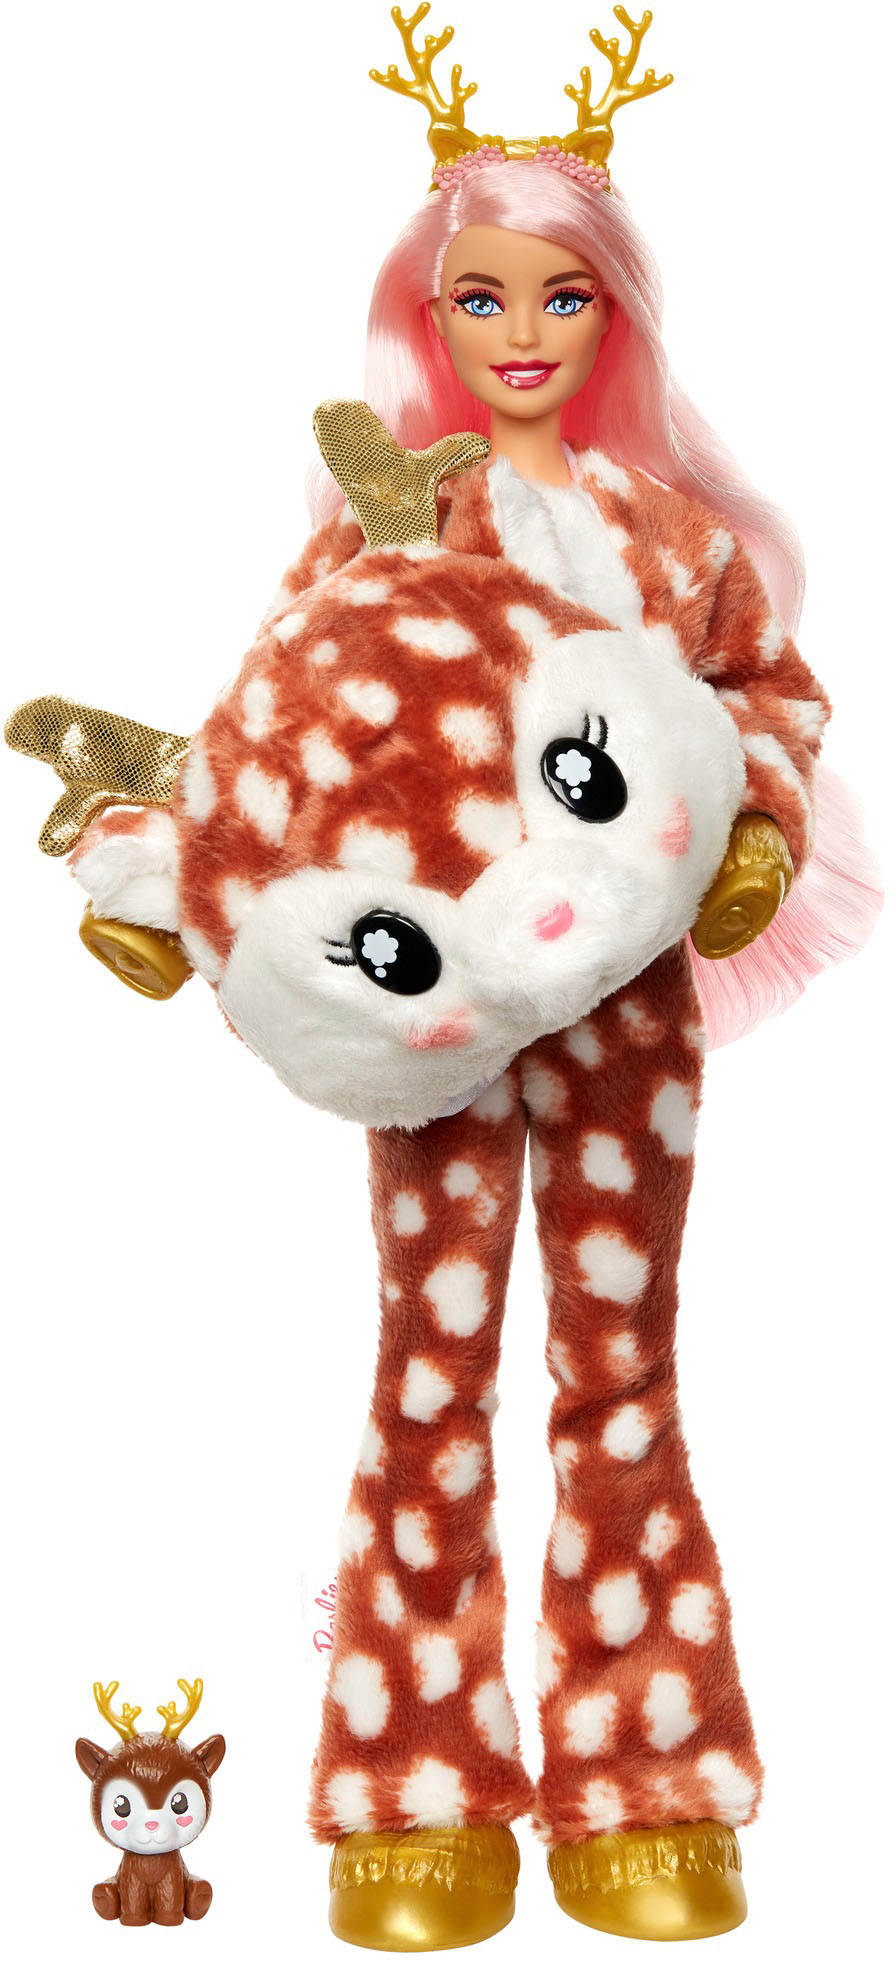 Mattel Launches Barbie Cutie Reveal Dolls with Fuzzy Animal Costumes - The  Toy Insider